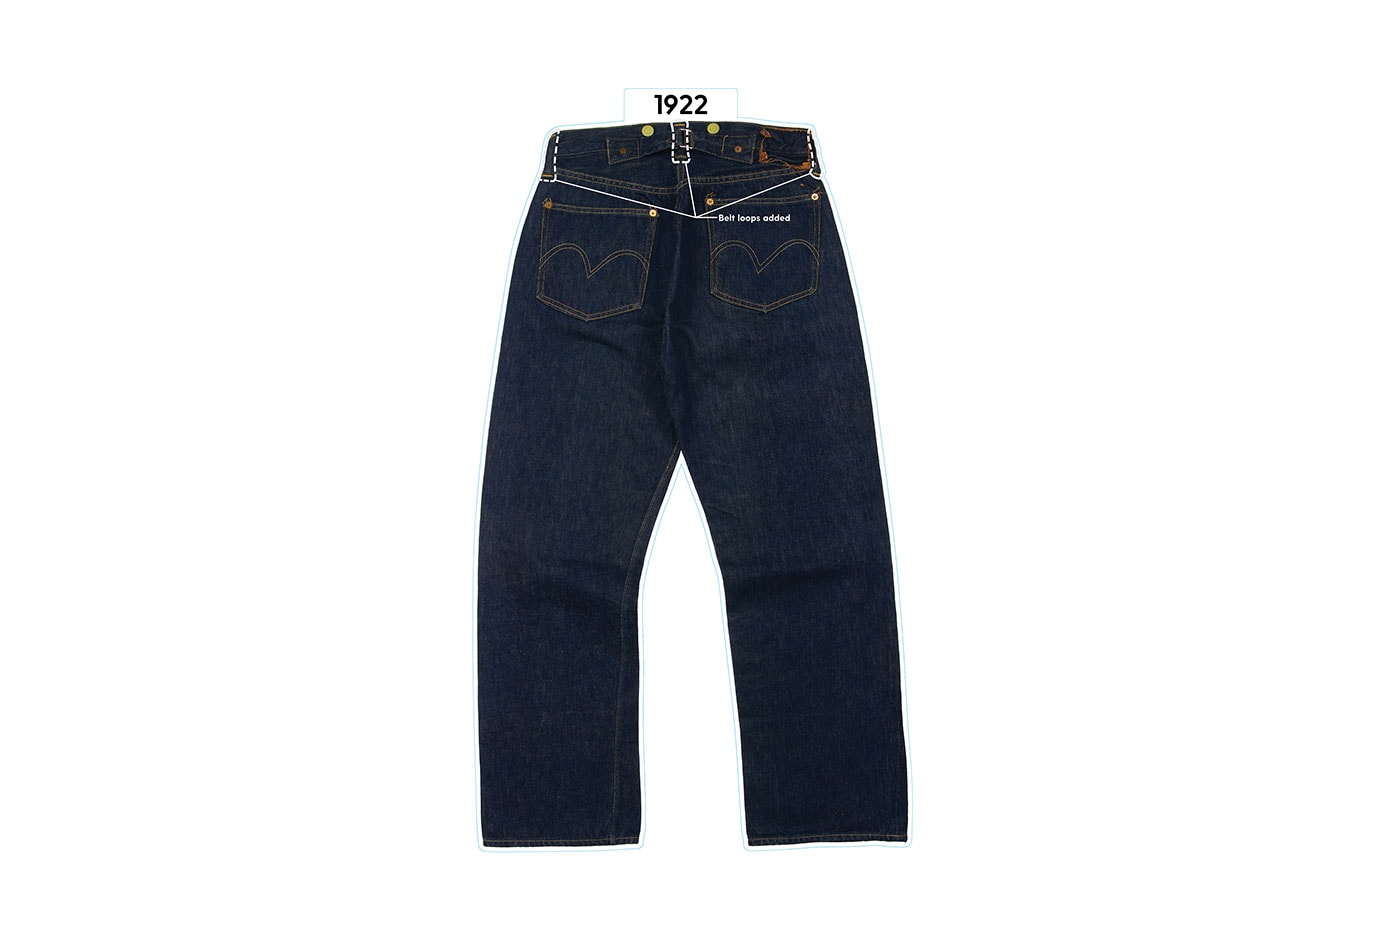 Rediscovering the Levi's 501 The World's First Blue Jeans metal rivets patent levi strauss feature info